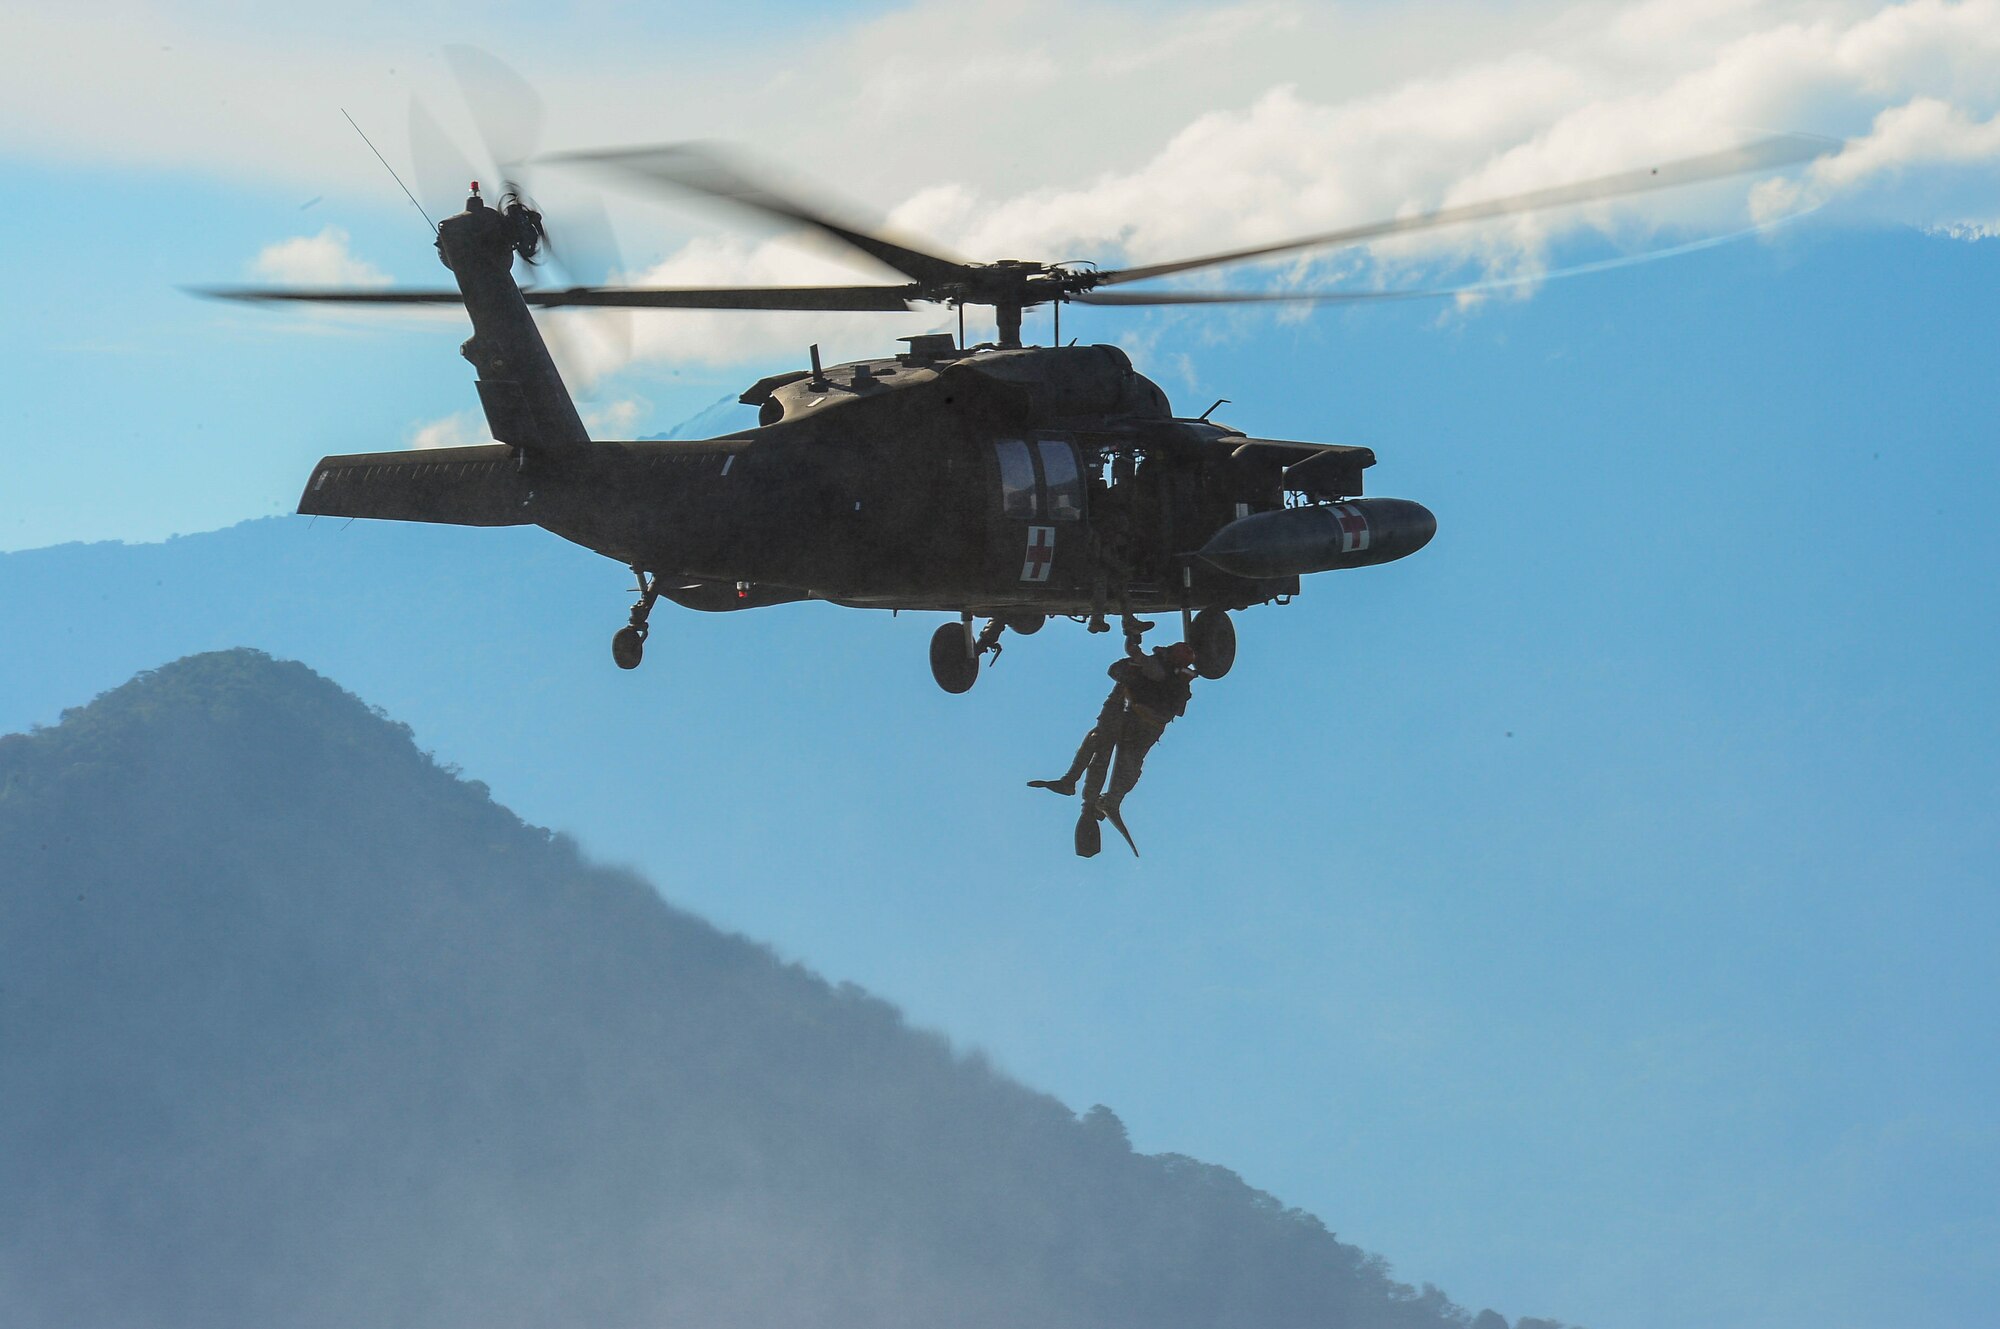 A medic from the 1-228th Aviation Battalion hoists a member of U.S. Army Special Operations Forces into a UH-60 Black Hawk helicopter during over water hoist training at Lake Yojoa, Honduras, Jan. 22, 2015.   The 1-228th Aviation Regiment partnered with U.S. Army Special Operations personnel to practice recovering live personnel. The overwater hoist training was held to ensure members of Joint Task Force-Bravo are planning and preparing for crisis and contingency response, as well as countering transnational organized crime, and counterterrorism operations as part of U.S. Southern Command’s mission. Contingency planning prepares the command for various scenarios that pose the greatest probability of challenging our regional partners or threatening our national interests. (U.S. Air Force photo/Tech. Sgt. Heather Redman)